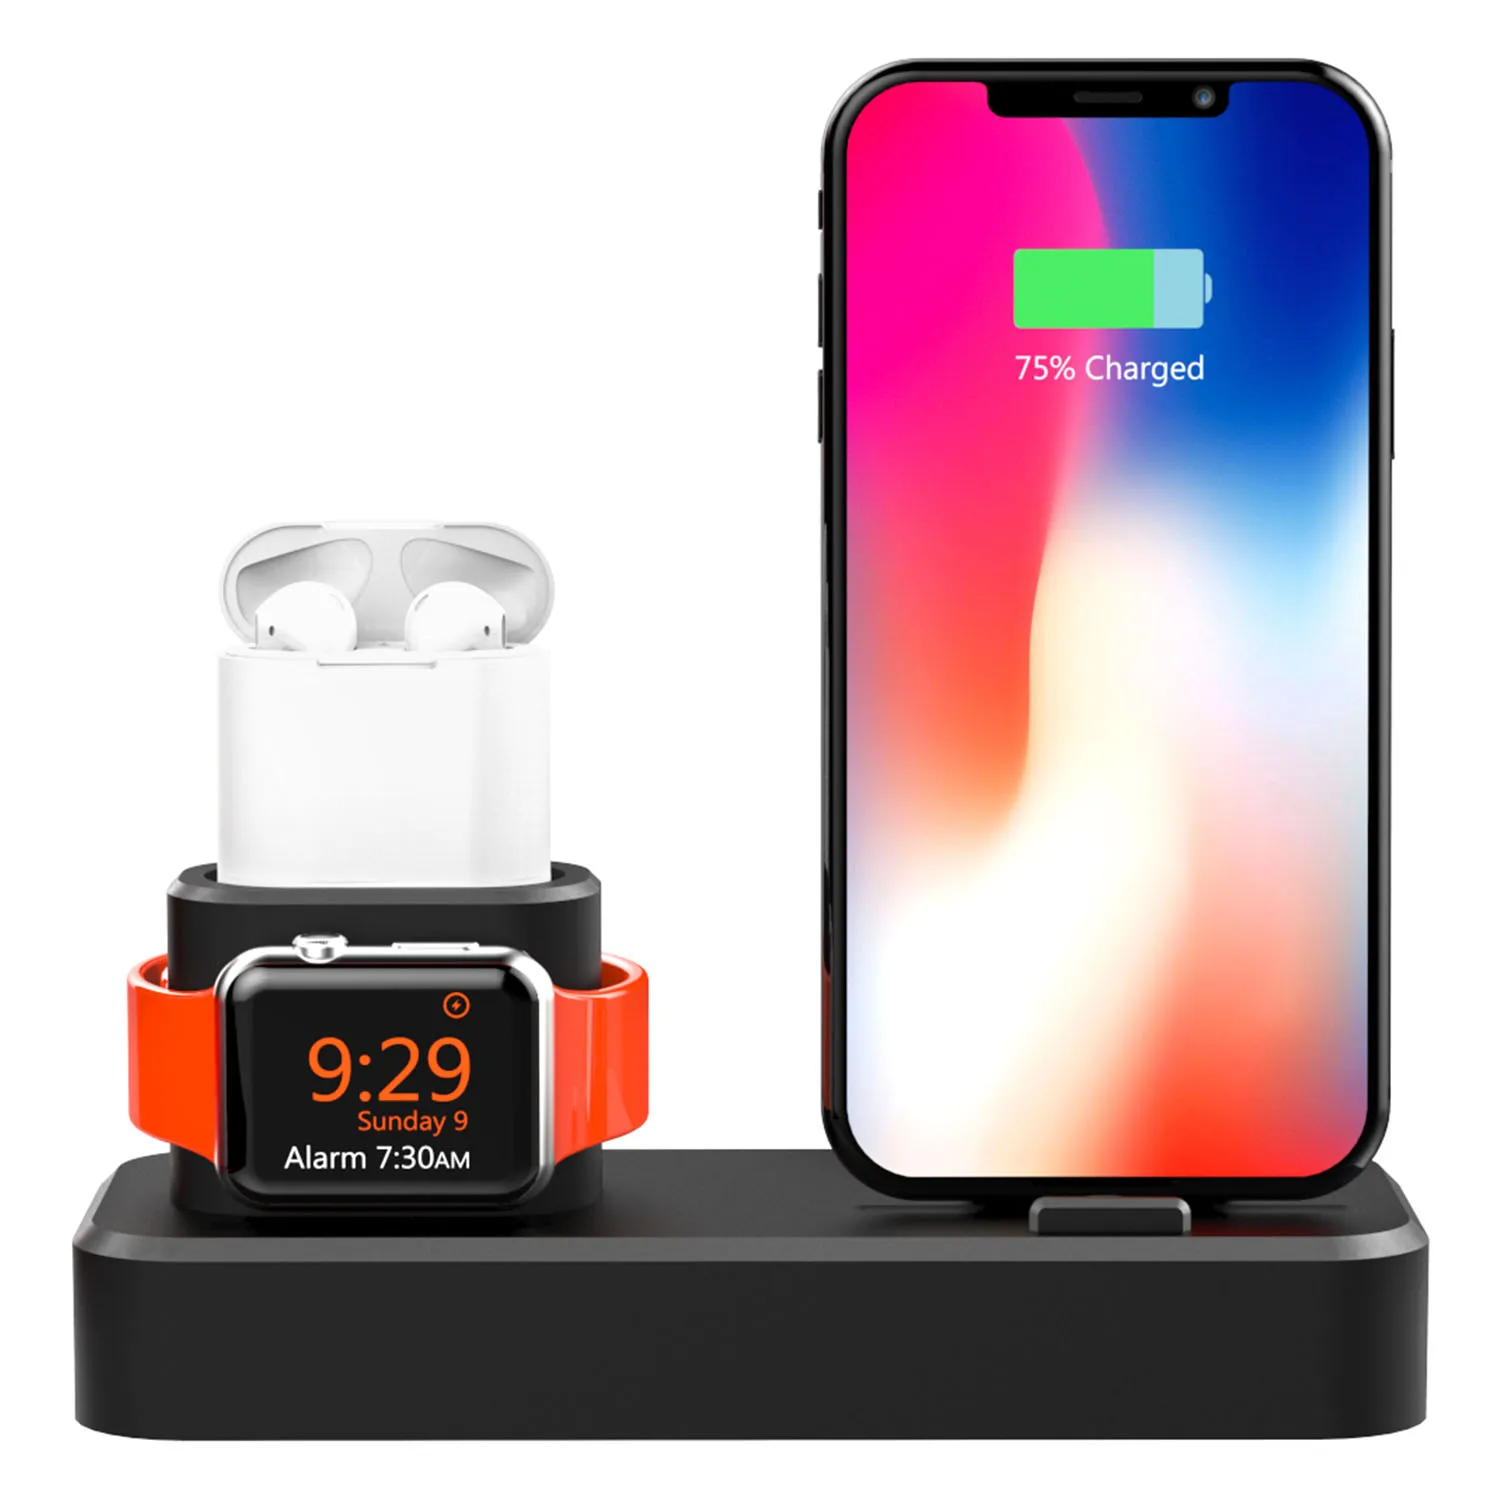 

Besegad 3 in 1 Silicone Gel Charging Holder Dock Station Charger Stand for Apple Watch iWatch AirPods Air Pods iPhone X Xs Max